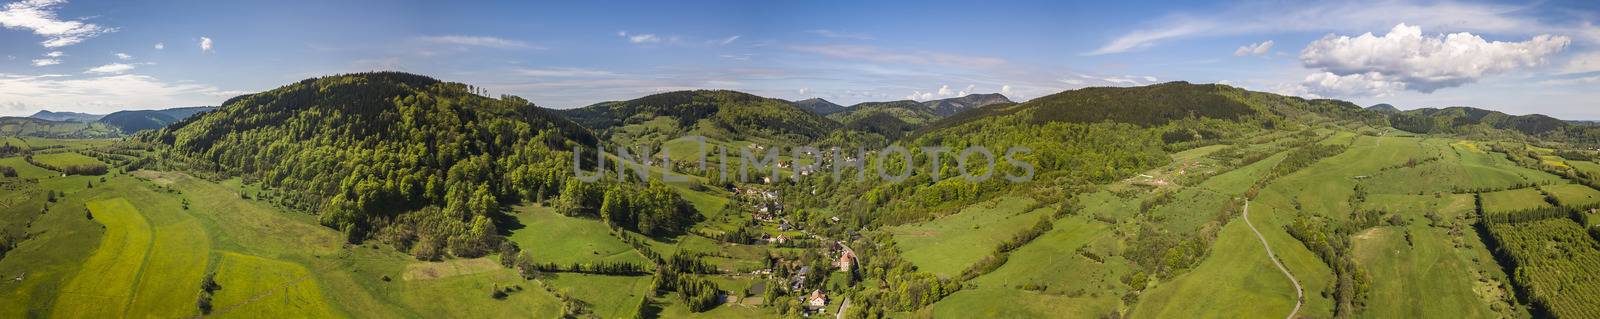 Valley of Lomnica in Sudetes by furzyk73